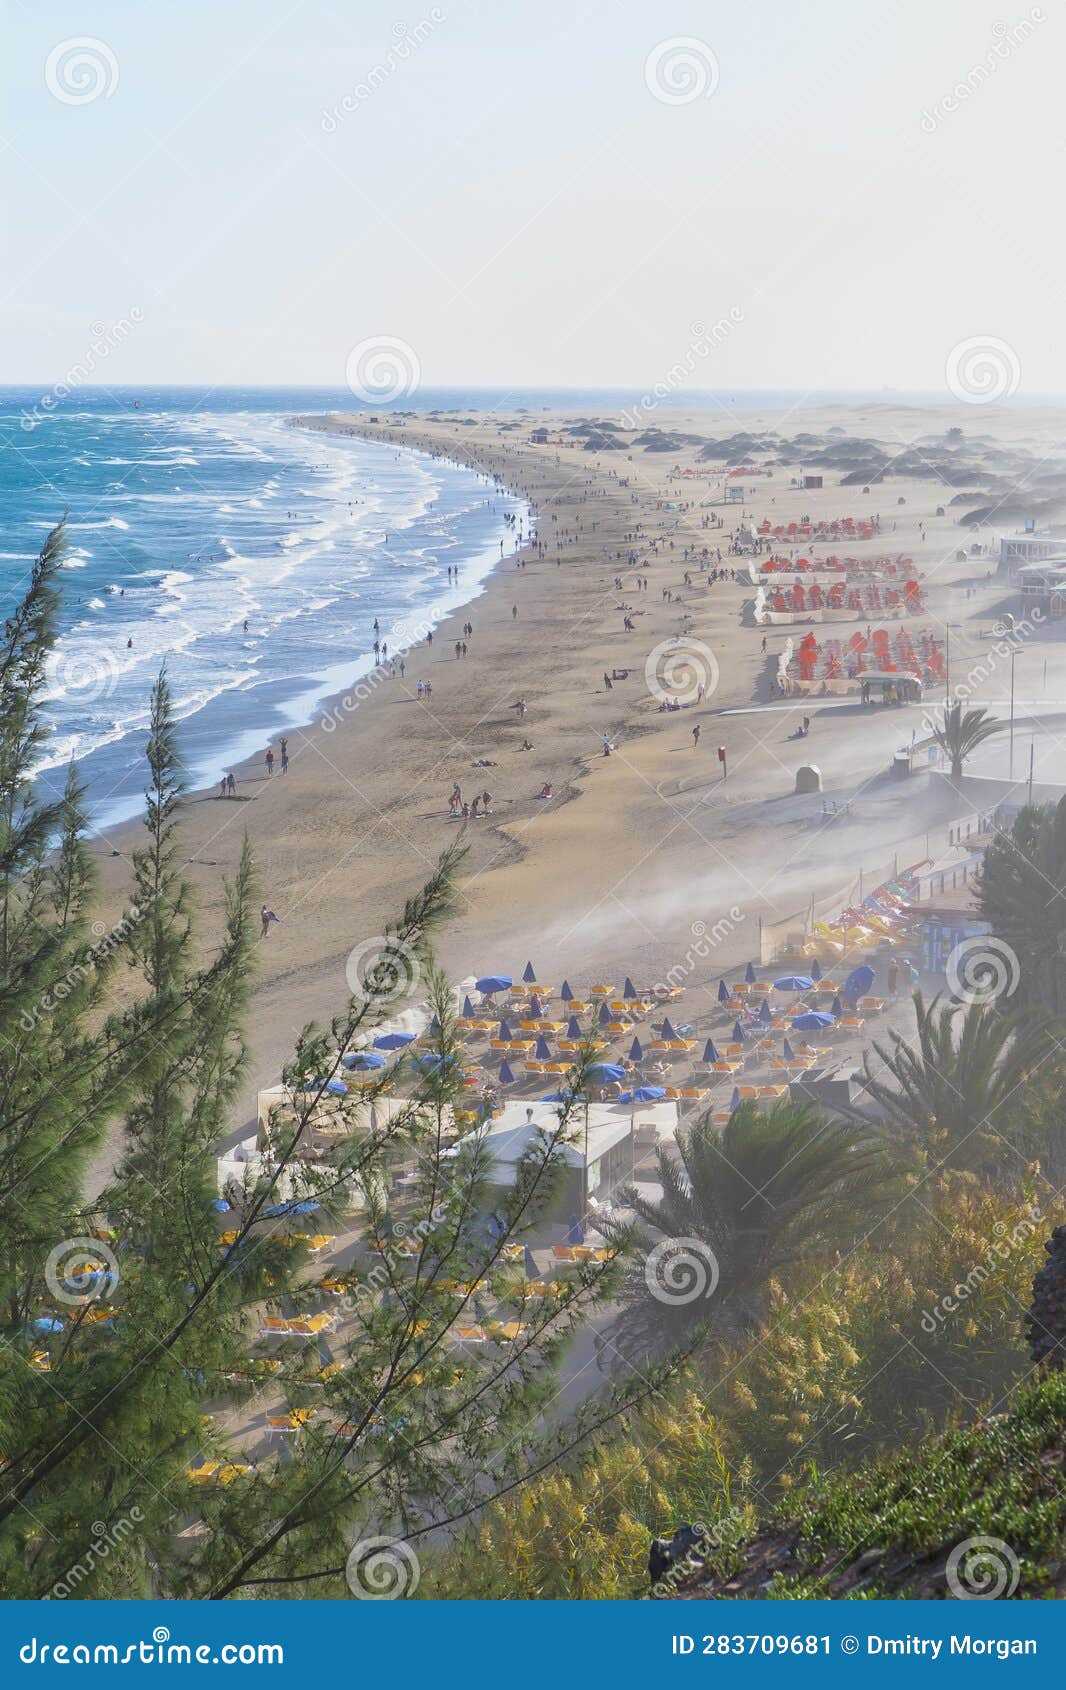 canary islands . view of playa del ingles beach in maspalomas located in gran canaria with sand gales and chairs